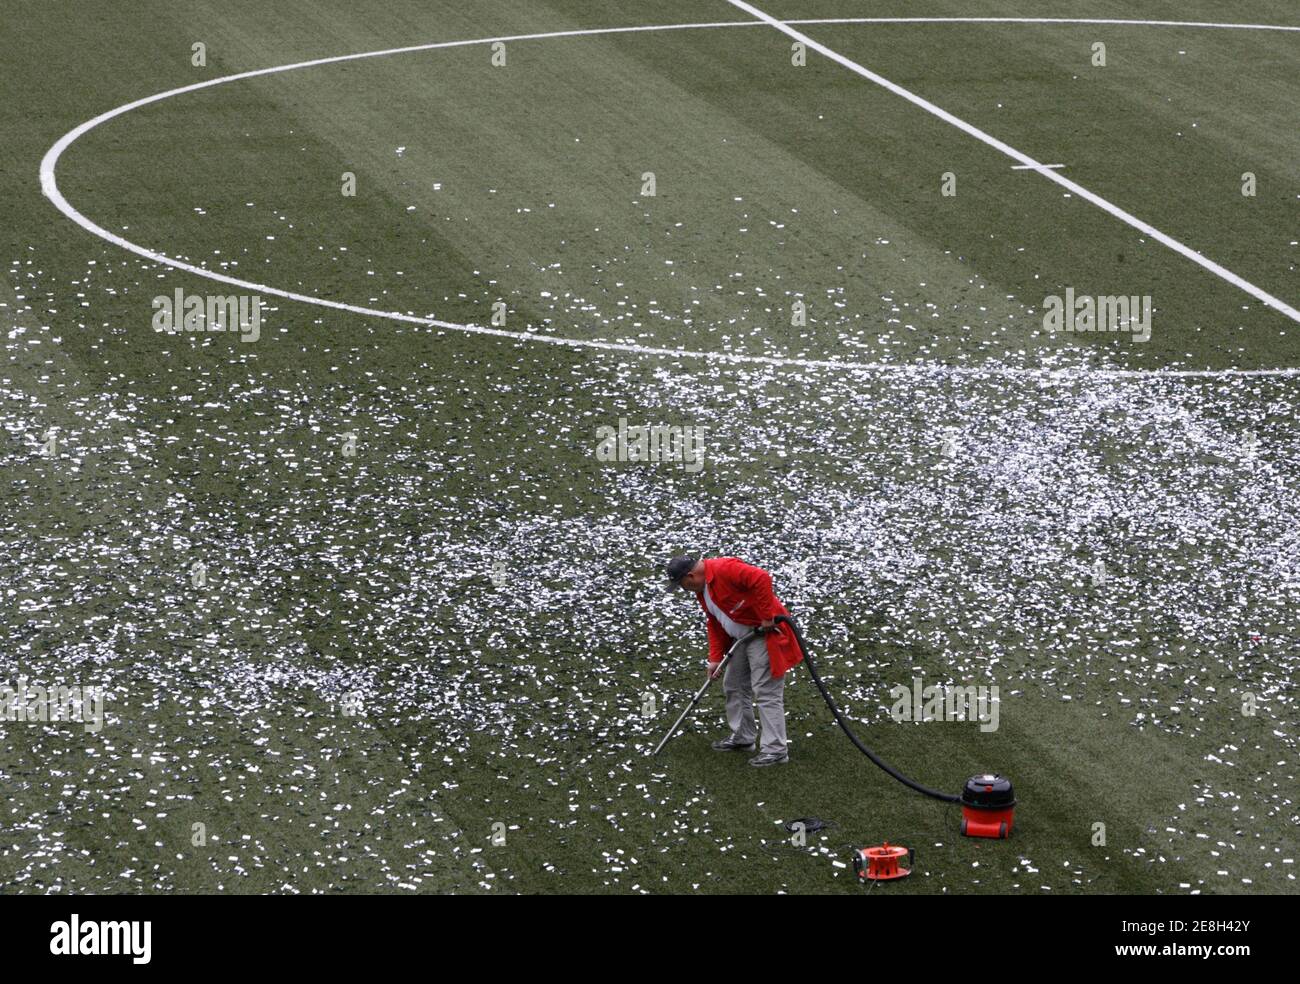 A worker cleans up confetti from the pitch with a vacuum cleaner after the Swiss cup final soccer match between  FC Luzern and FC Basel's (FCB) at the Stade de Suisse in Bern May 28, 2007.   FC Basel's (FCB) won the Swiss cup. REUTERS/Pascal Lauener (SWITZERLAND) Stock Photo